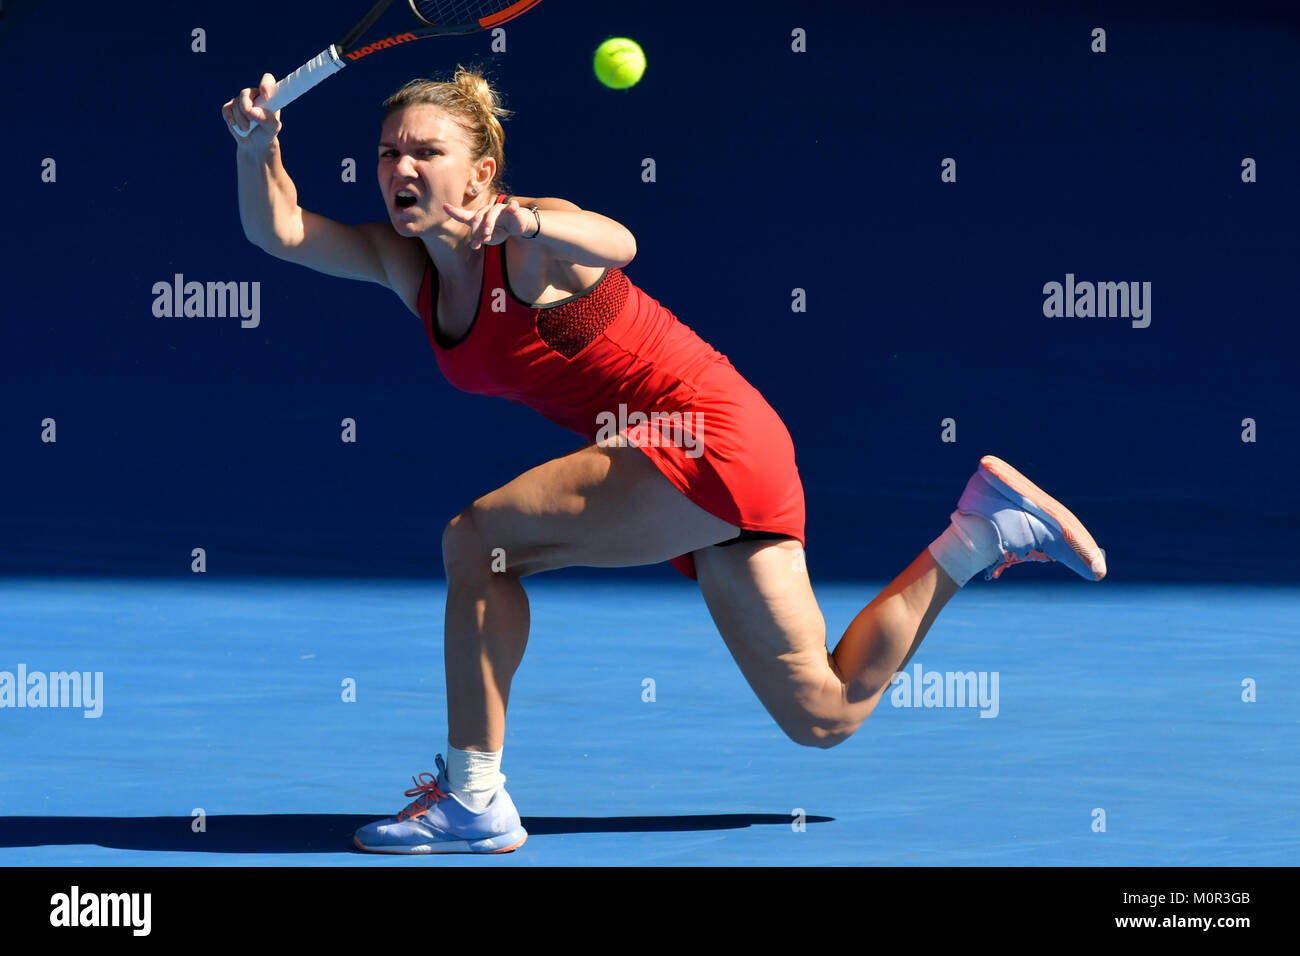 Melbourne, Australia. 24th Jan, 2018. Number one seed Simona Halep of Romania in action in a Quarterfinals match against number six seed Karolina Pliskova of the Czech Republic on day ten of the 2018 Australian Open Grand Slam tennis tournament in Melbourne, Australia. 63 62. Halep won Sydney Low/Cal Sport Media/Alamy Live News Stock Photo